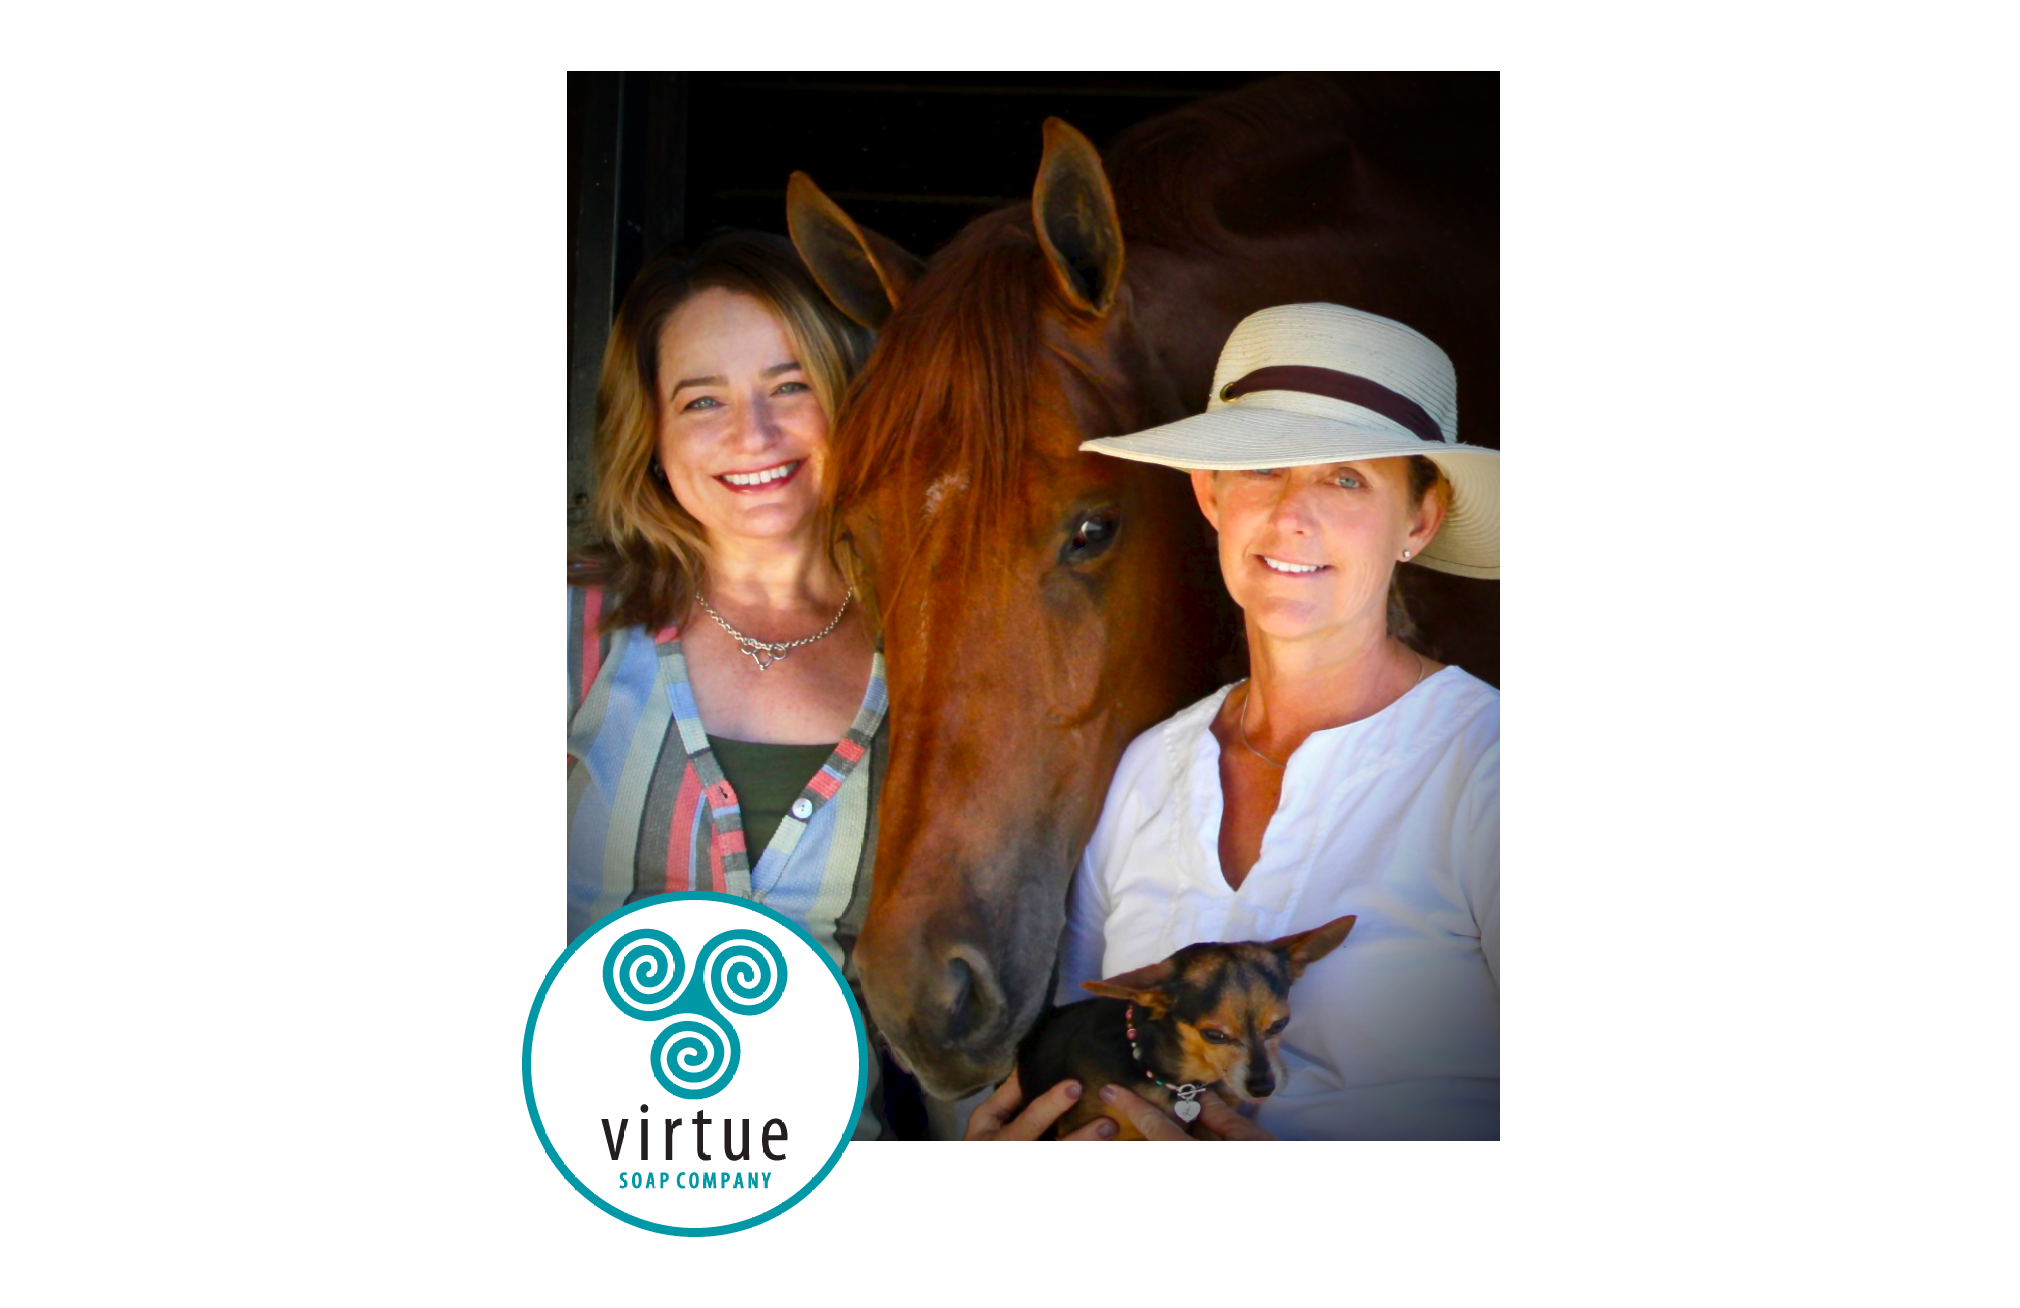 All Natural Artisan Soaps and Skin Care - Virtue Soap Company